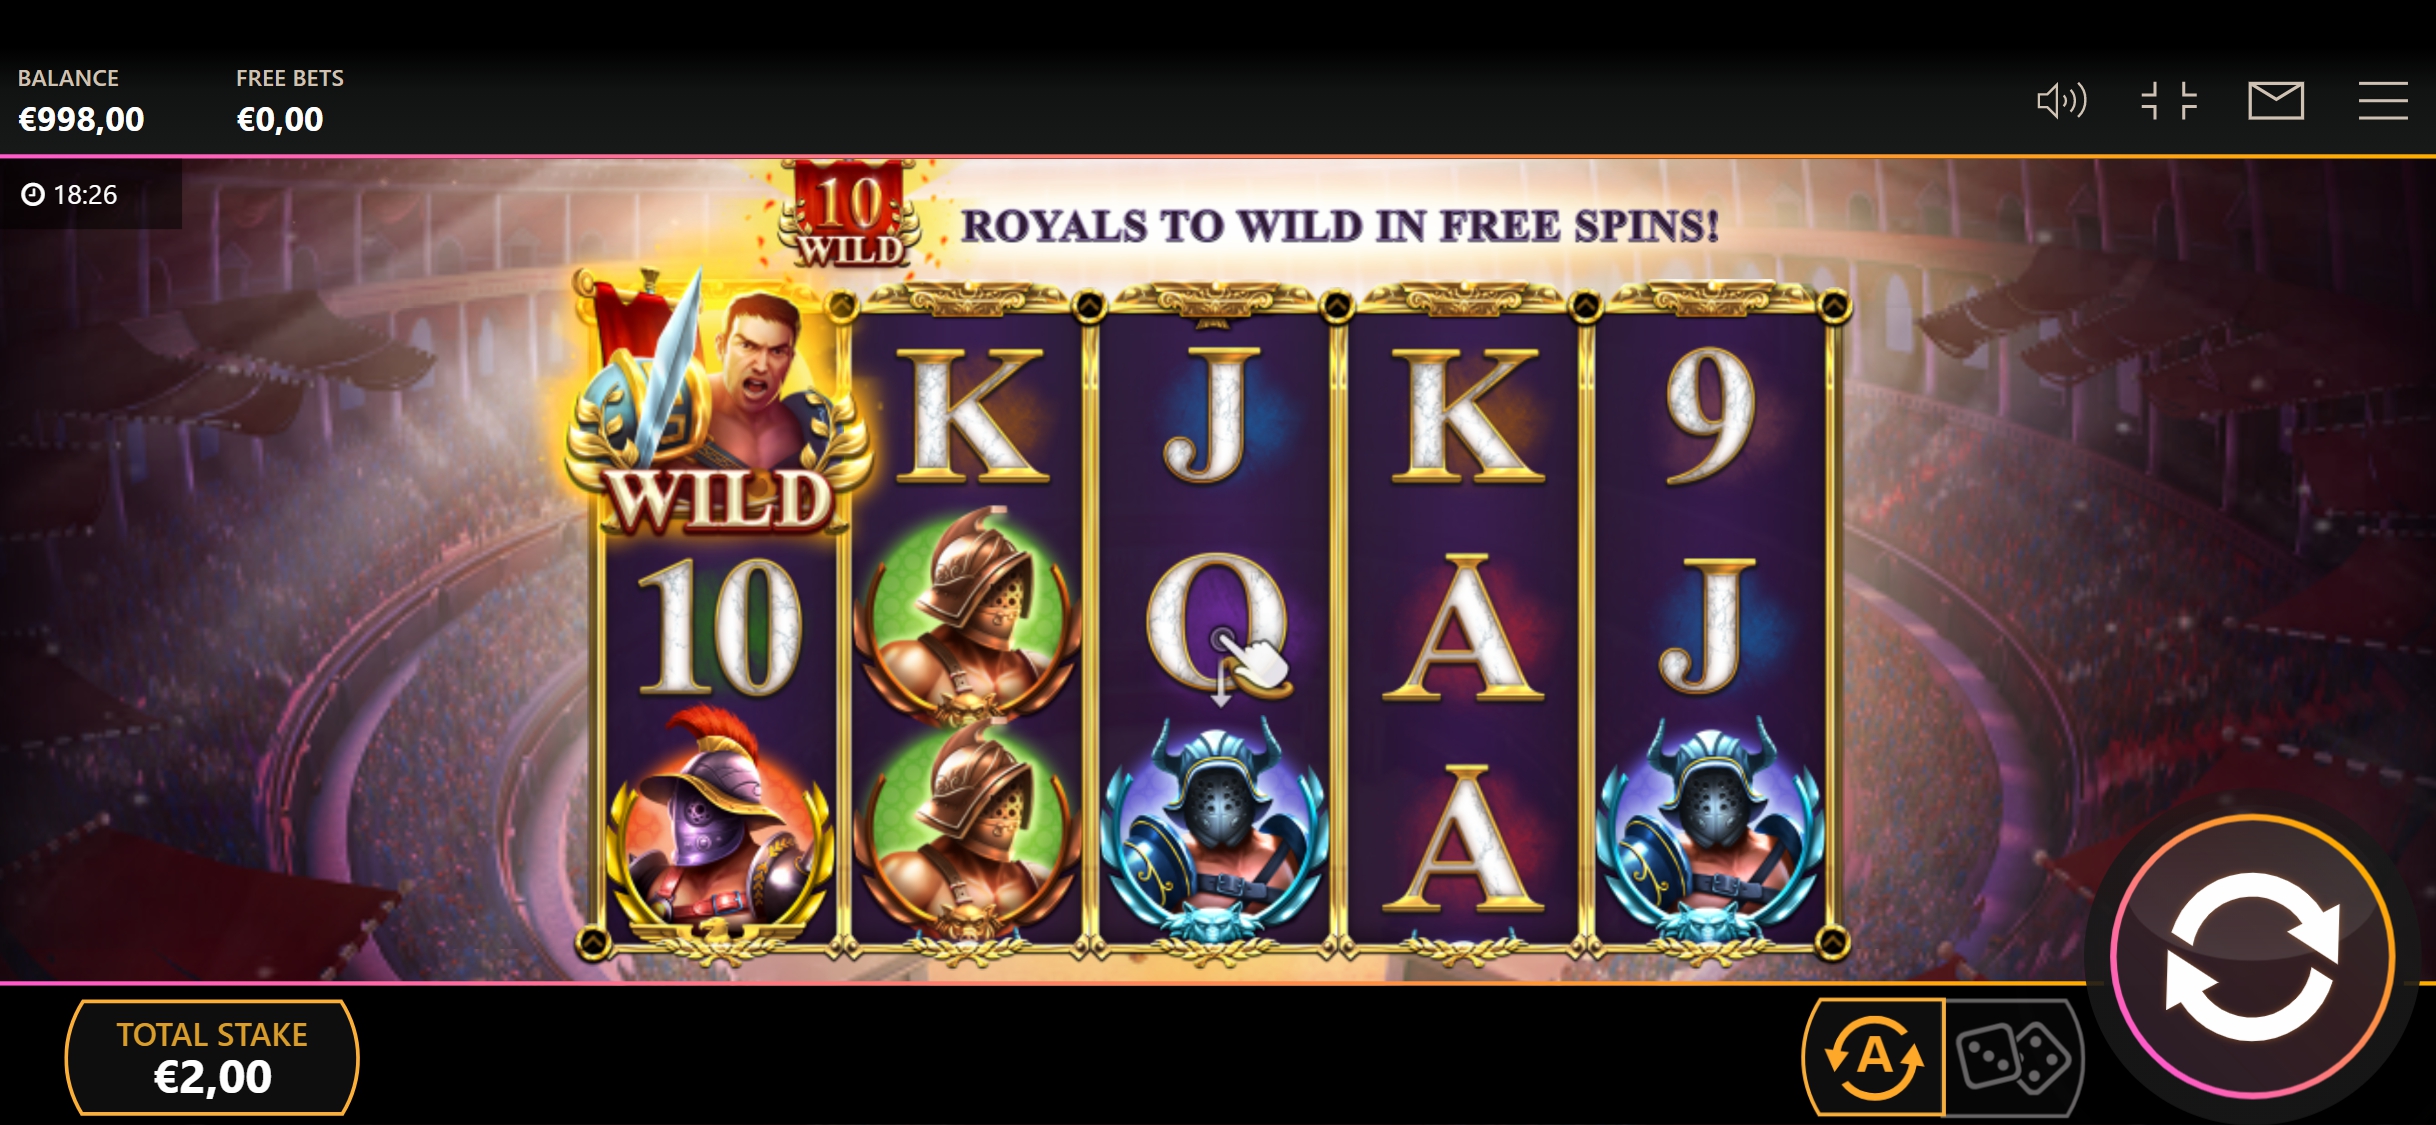 Sports Bet Casino Mobile Slot Games Review